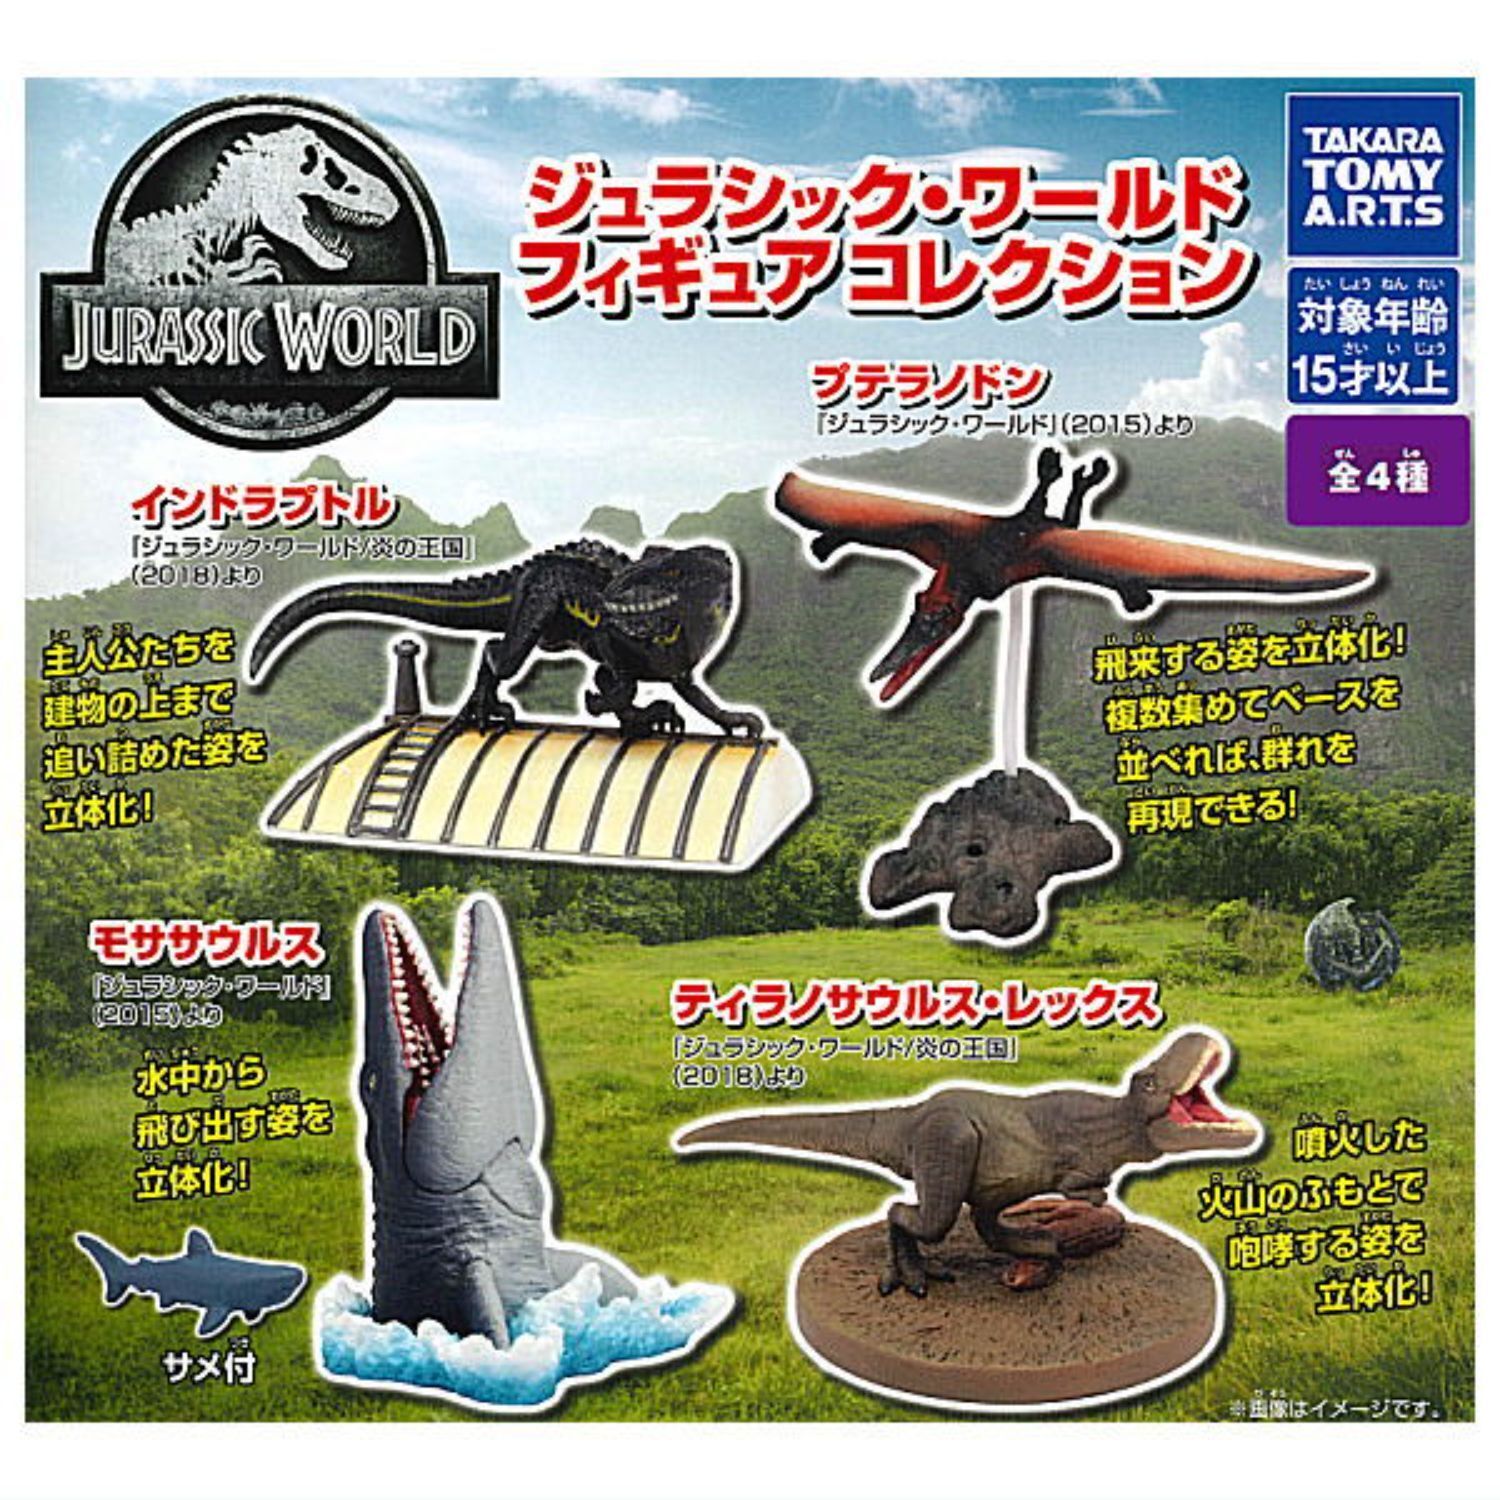 Jurassic World Figure Collection Capsule Toy 4 Types Full Comp Set Gacha New